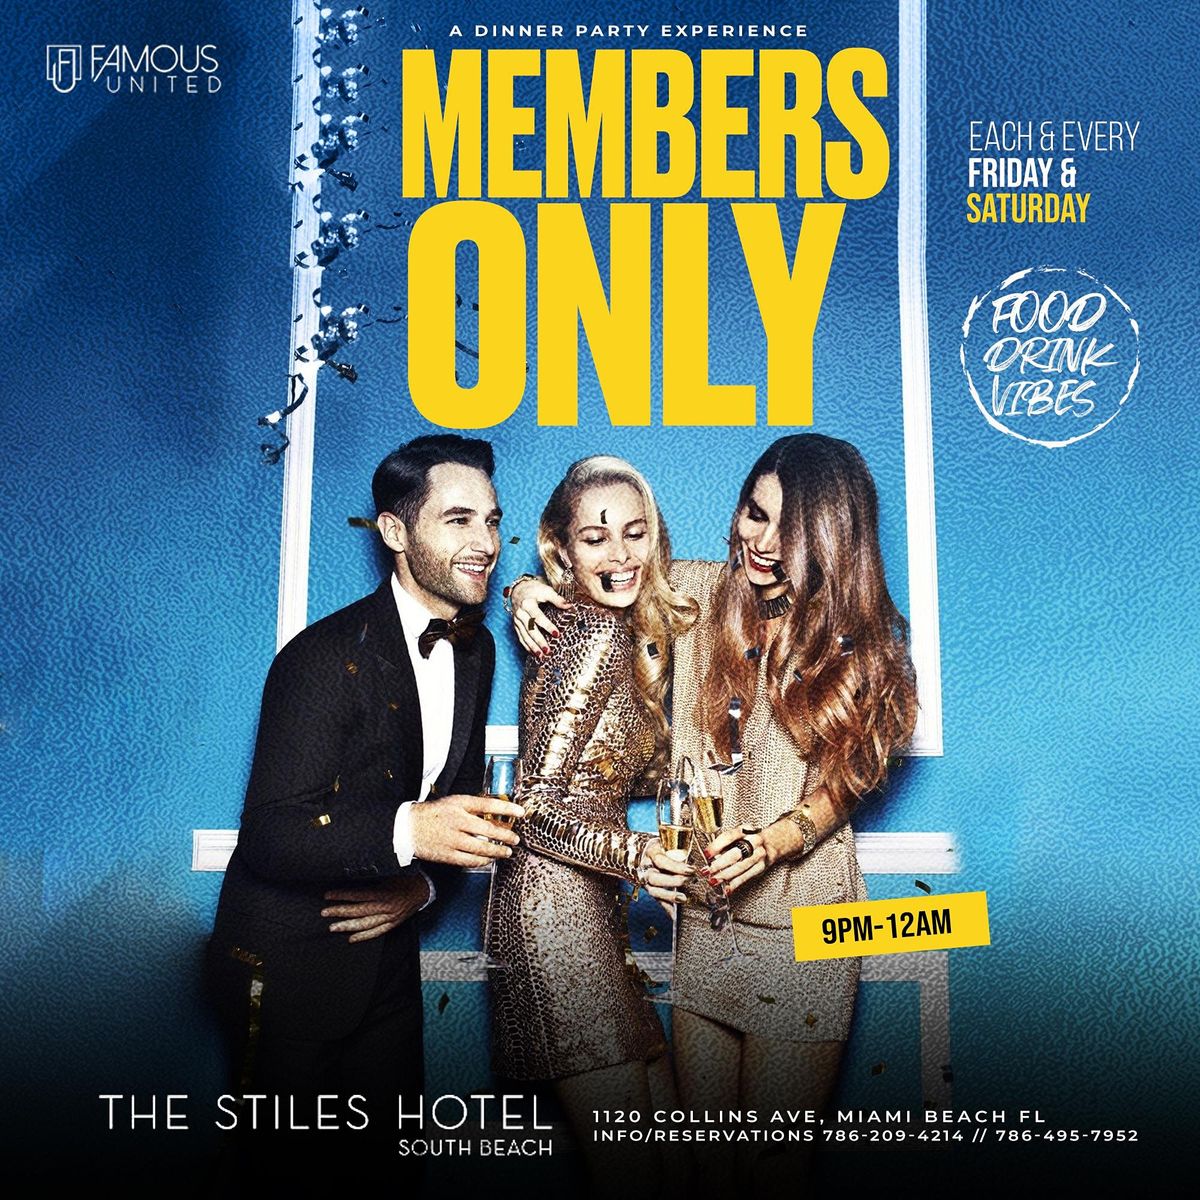 MEMBERS ONLY DINNER PARTY @ STILES HOTEL